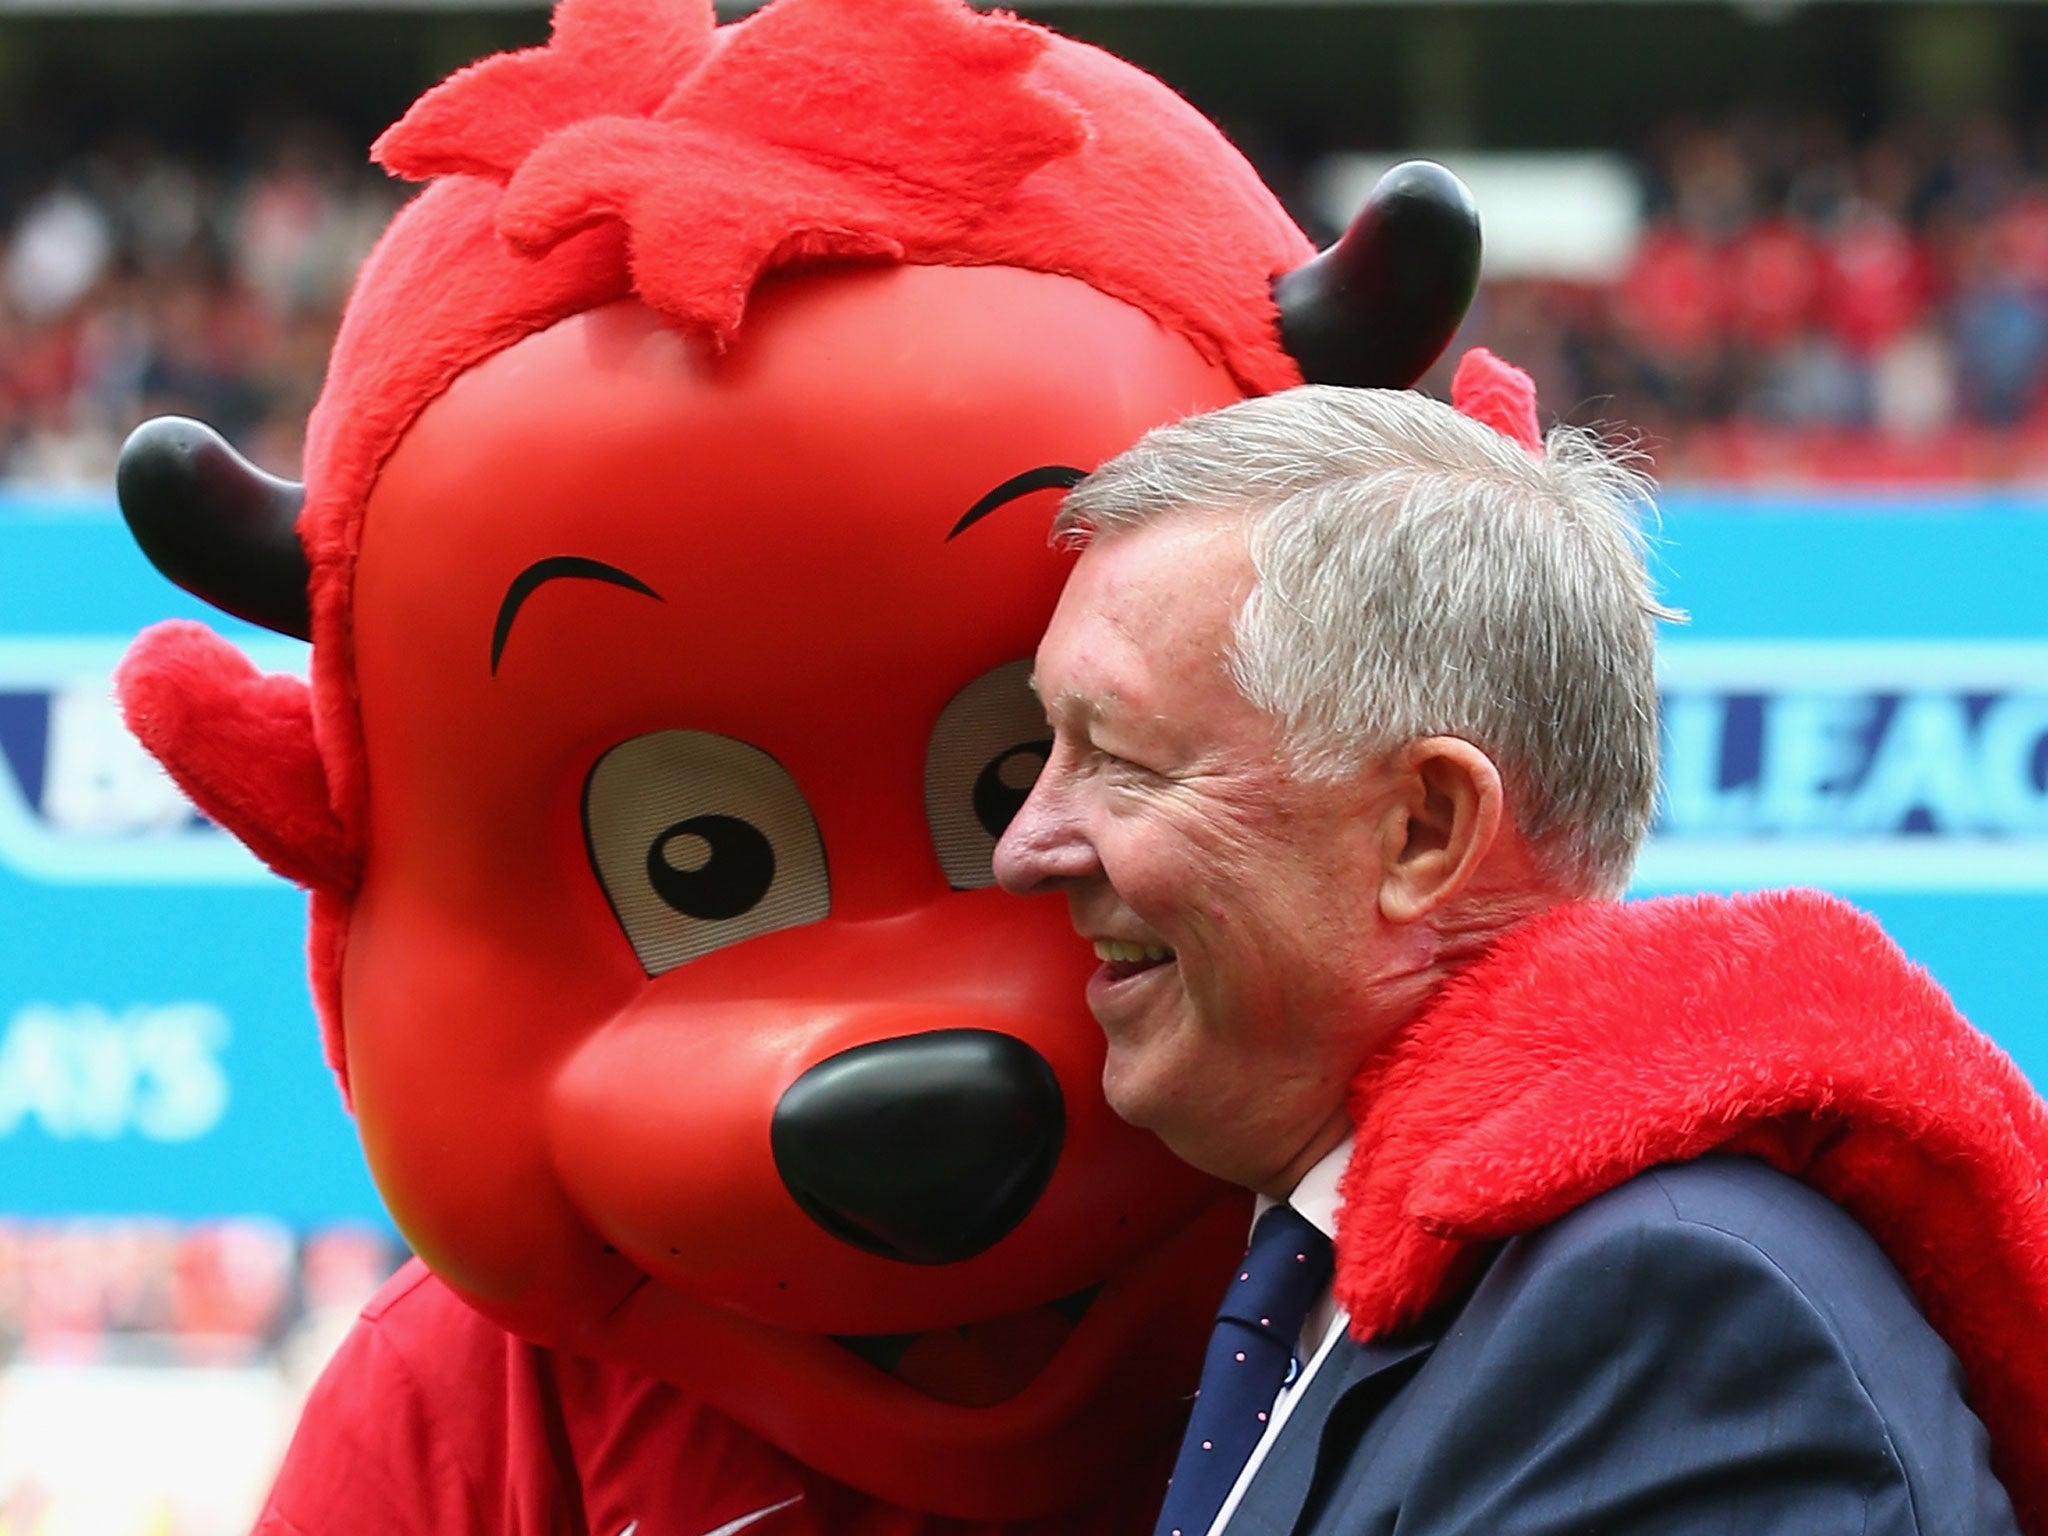 Sir Alex Ferguson with Fred the Red during the Premier League match against Everton at Old Trafford earlier this month